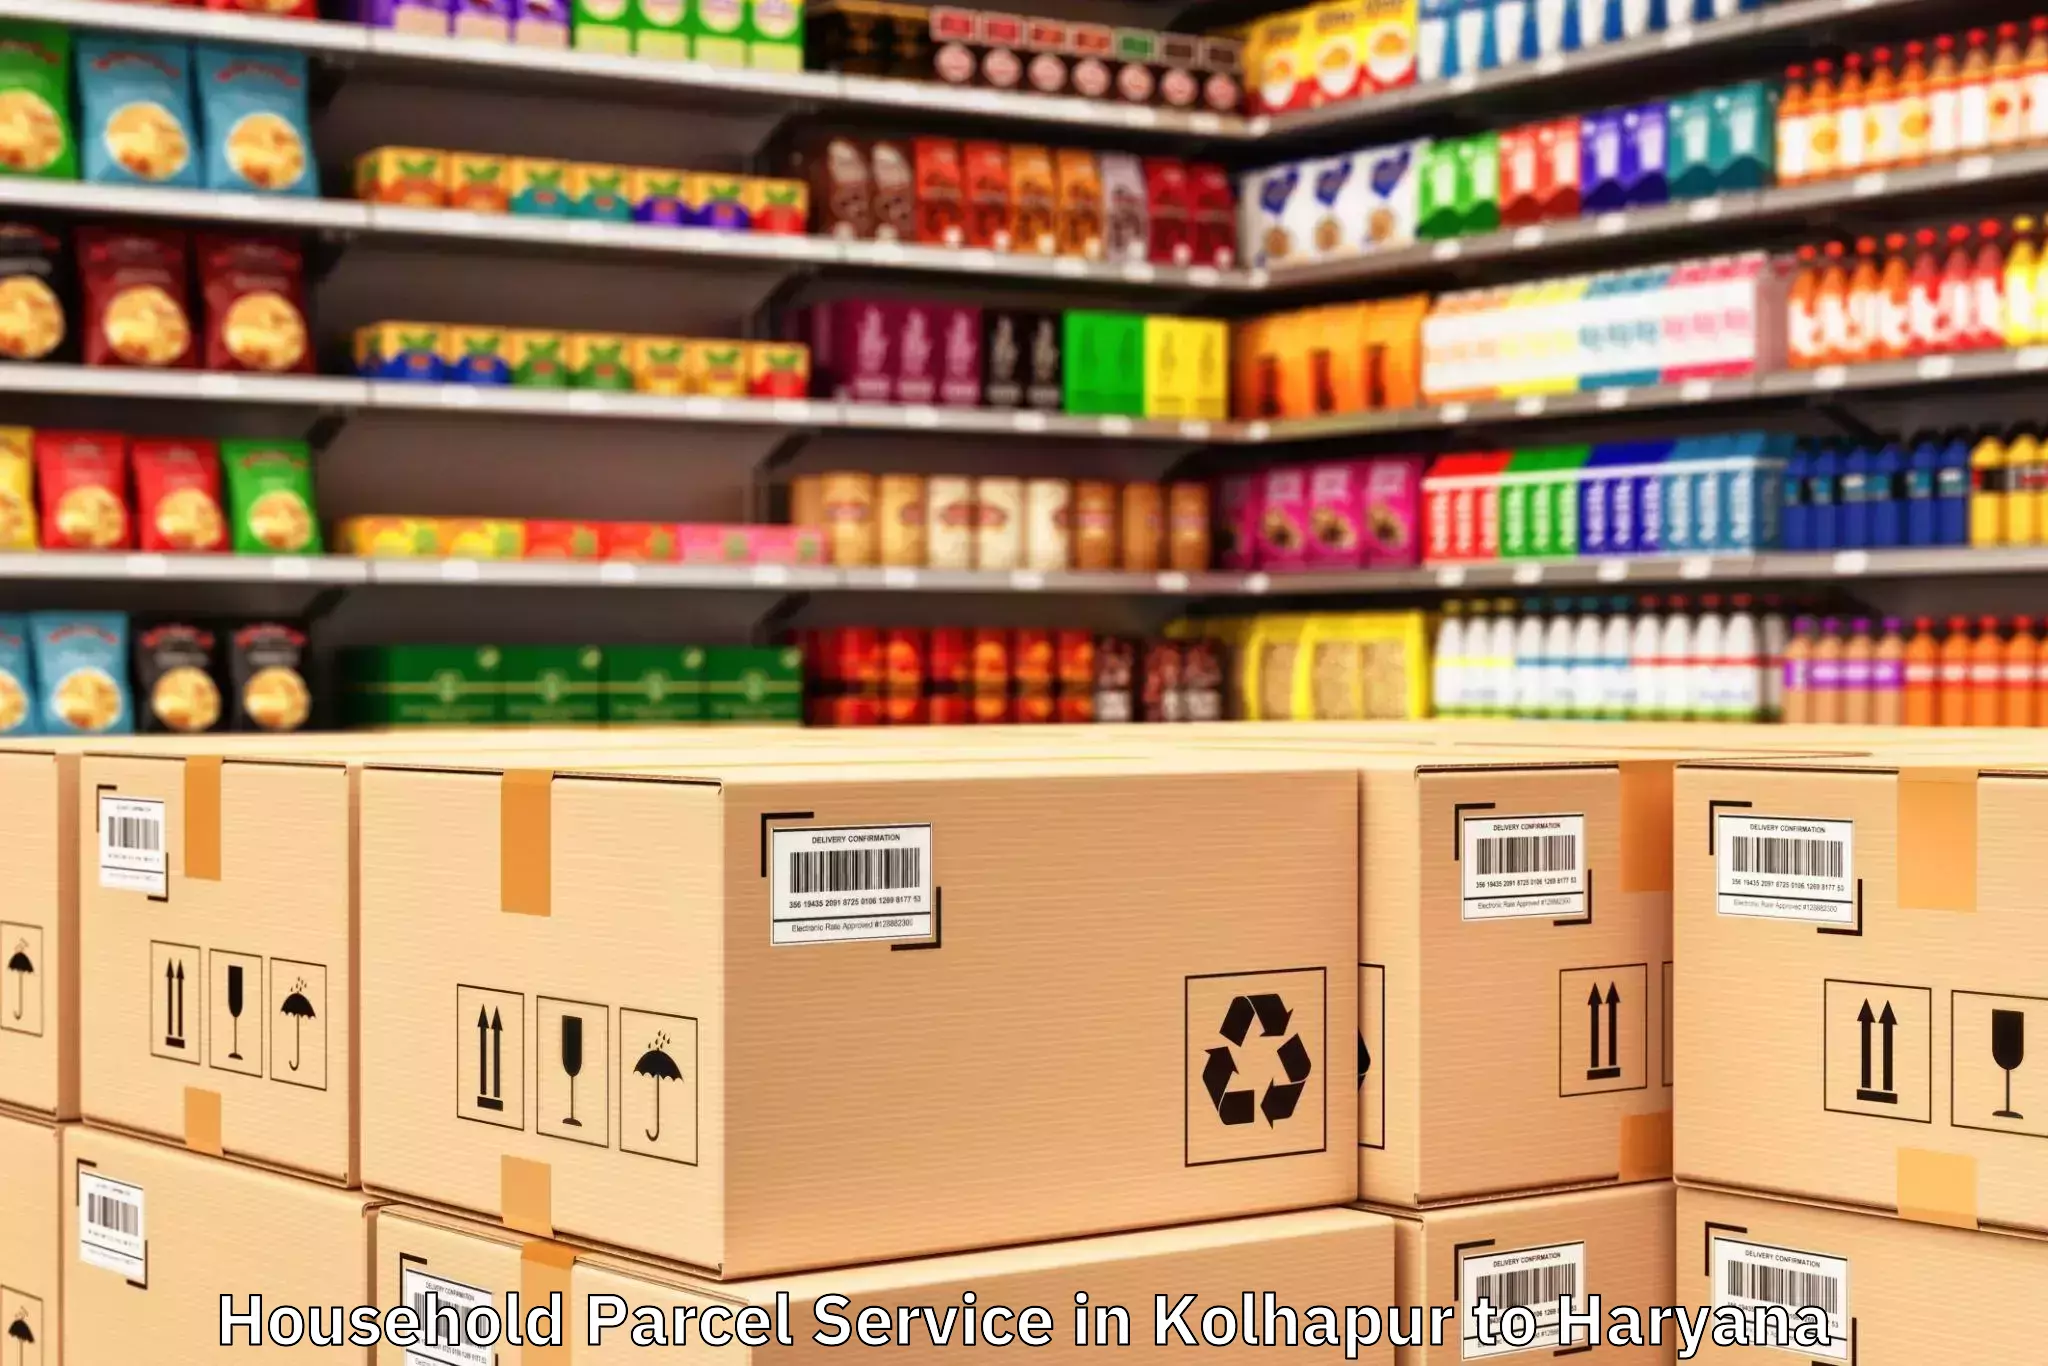 Top Kolhapur to Ganaur Household Parcel Service Available